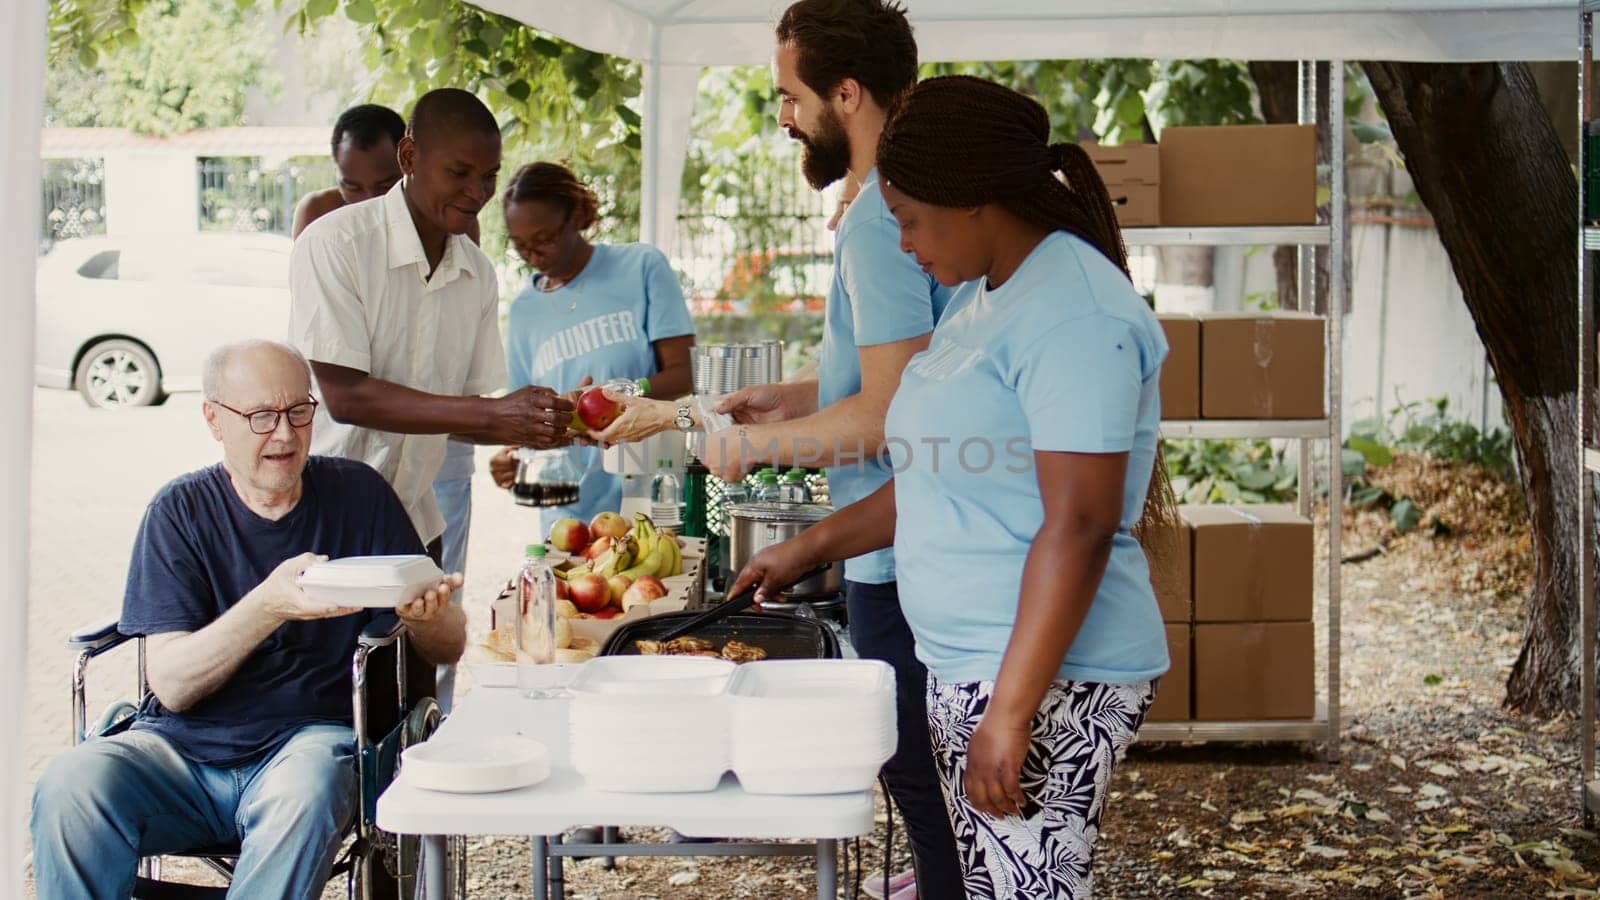 Group dedicated to charity helping out the poor giving away free food including fresh fruits to homeless people. Volunteers give assistance to alleviate hunger for disabled person in wheelchair.